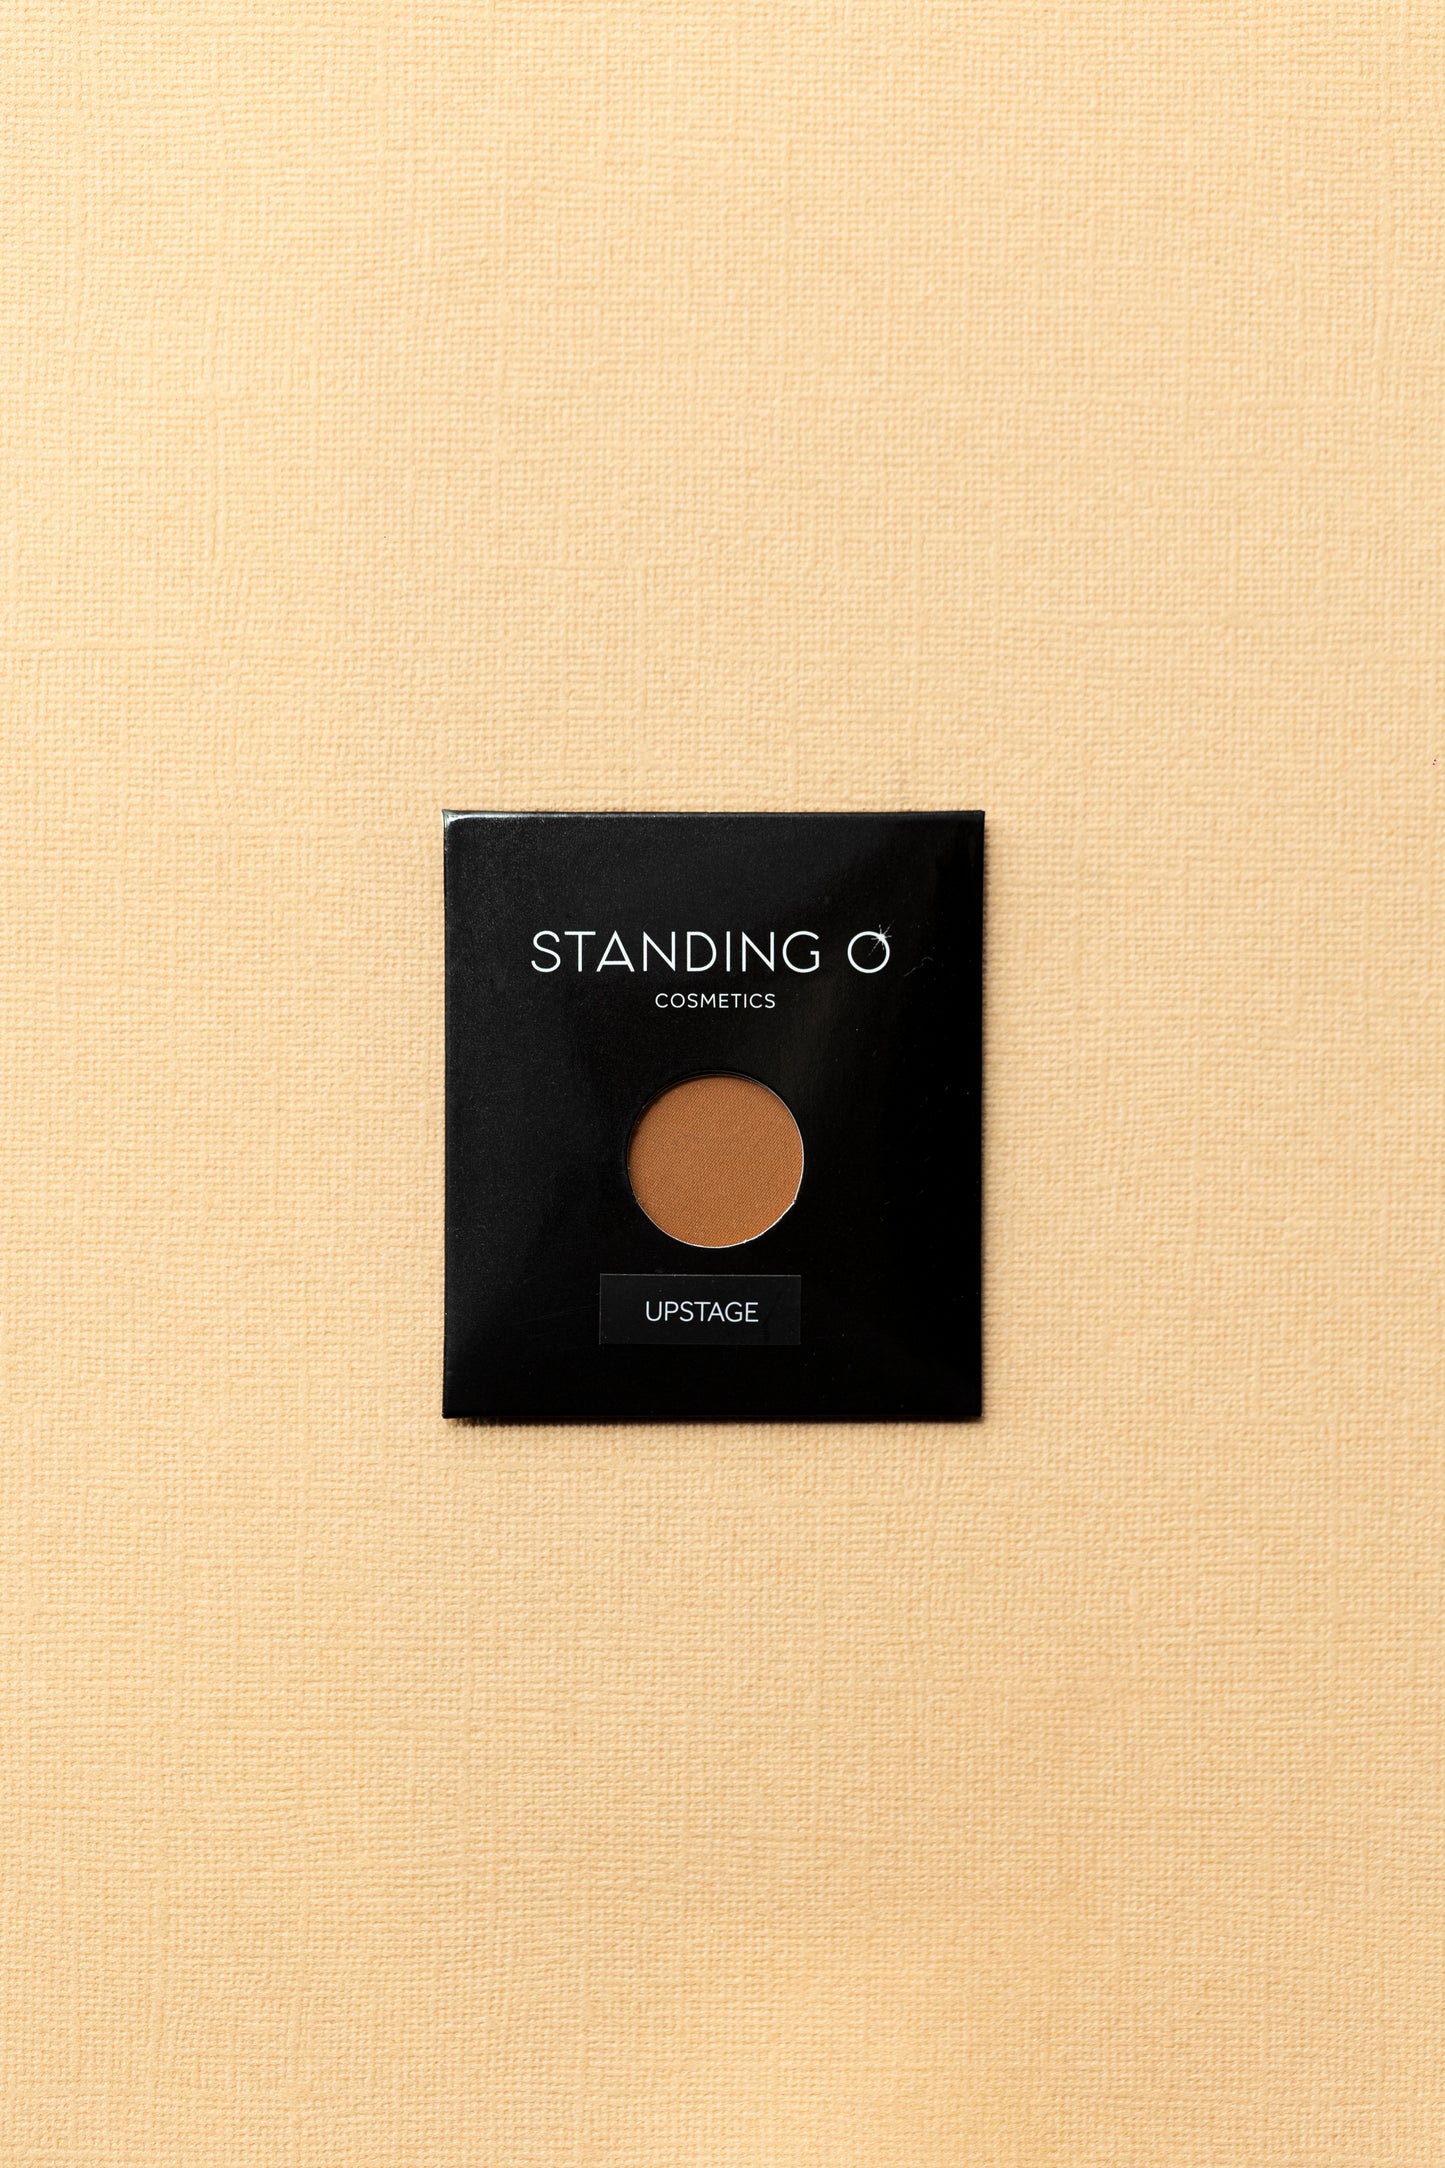 Discover the allure of 'Standing O' single eyeshadow in shade 'Upstage', offering a rich and intense color payoff.